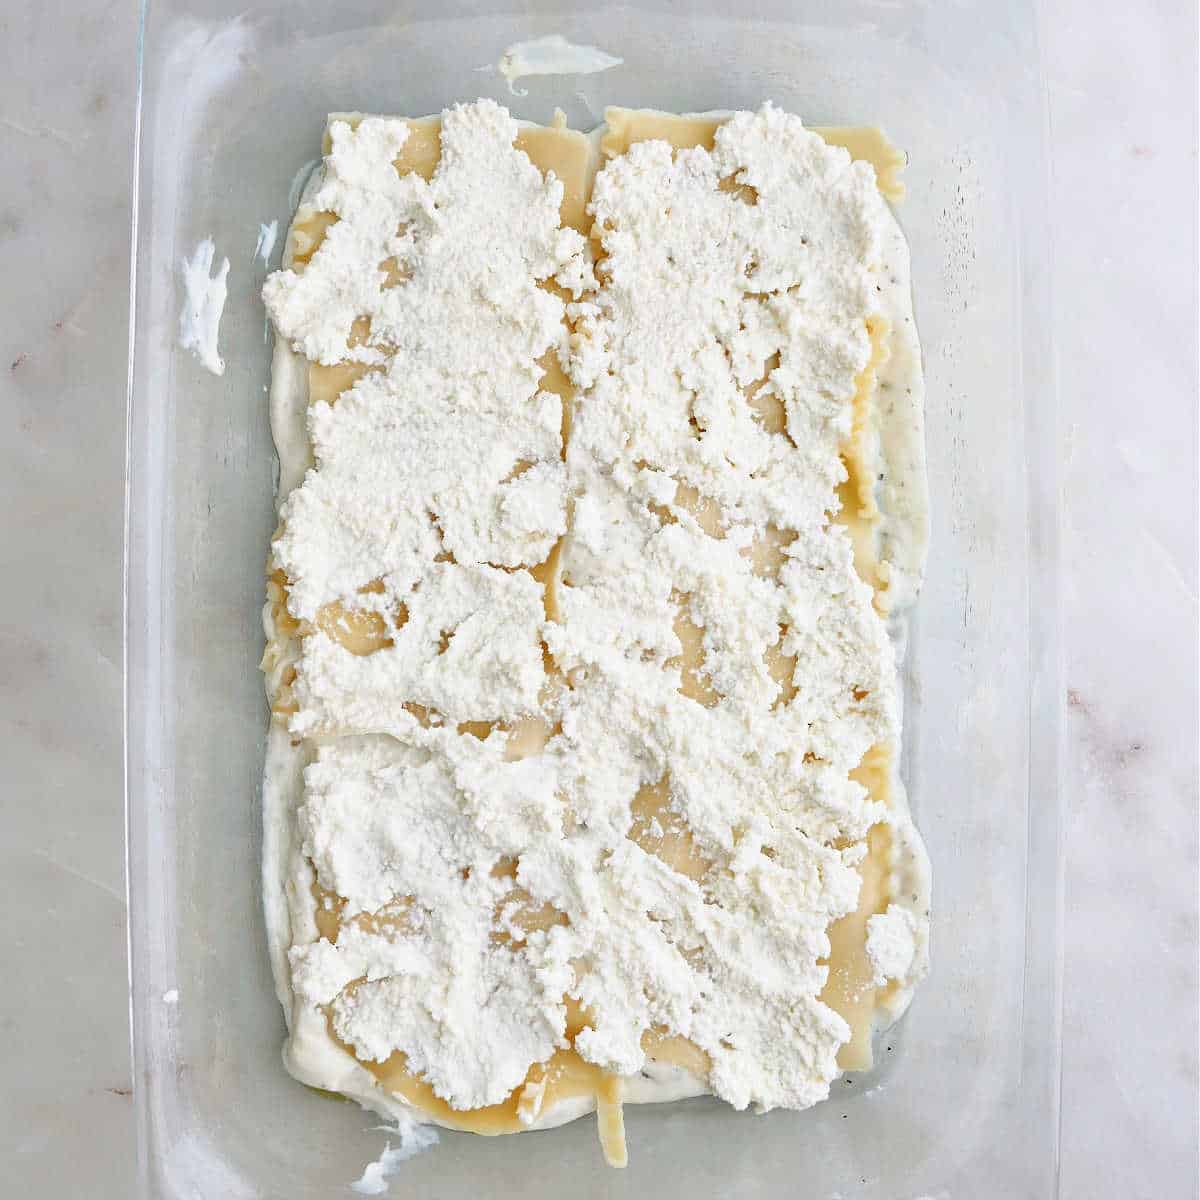 white sauce, lasagna noodles, and ricotta cheese in a glass baking dish